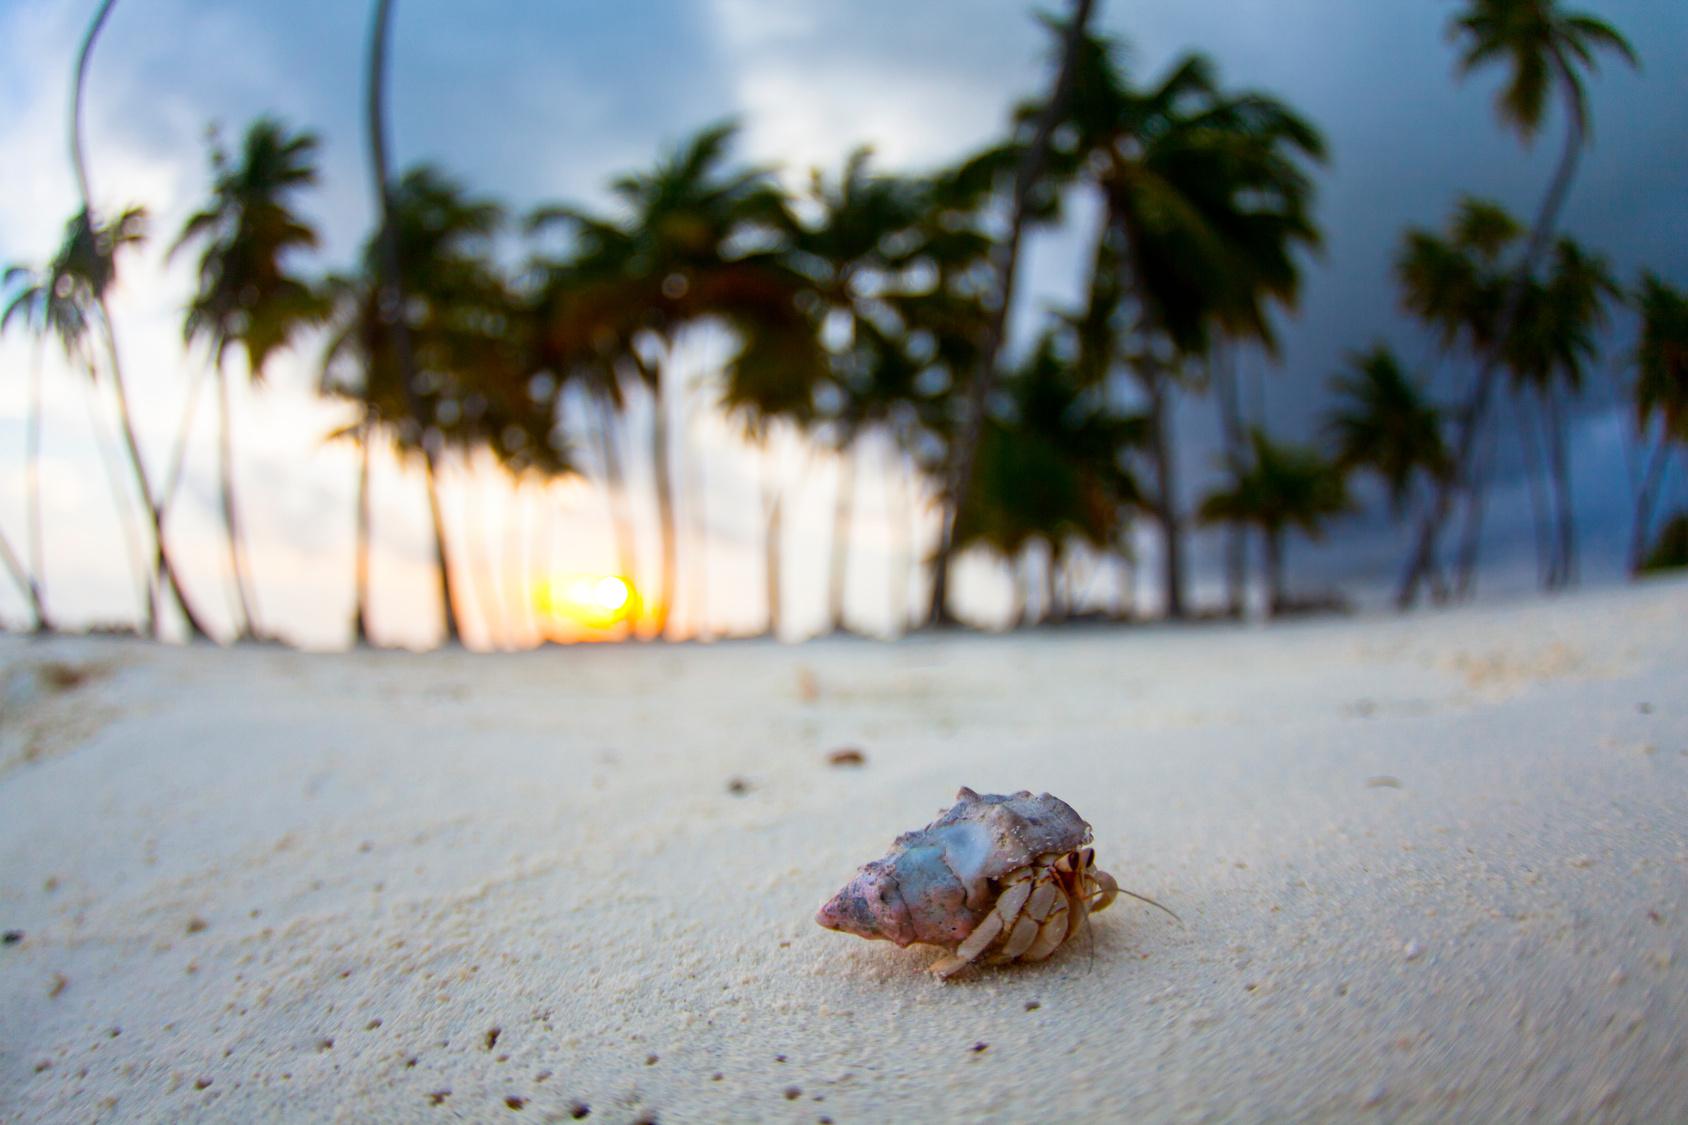 a hermit crab on the beach